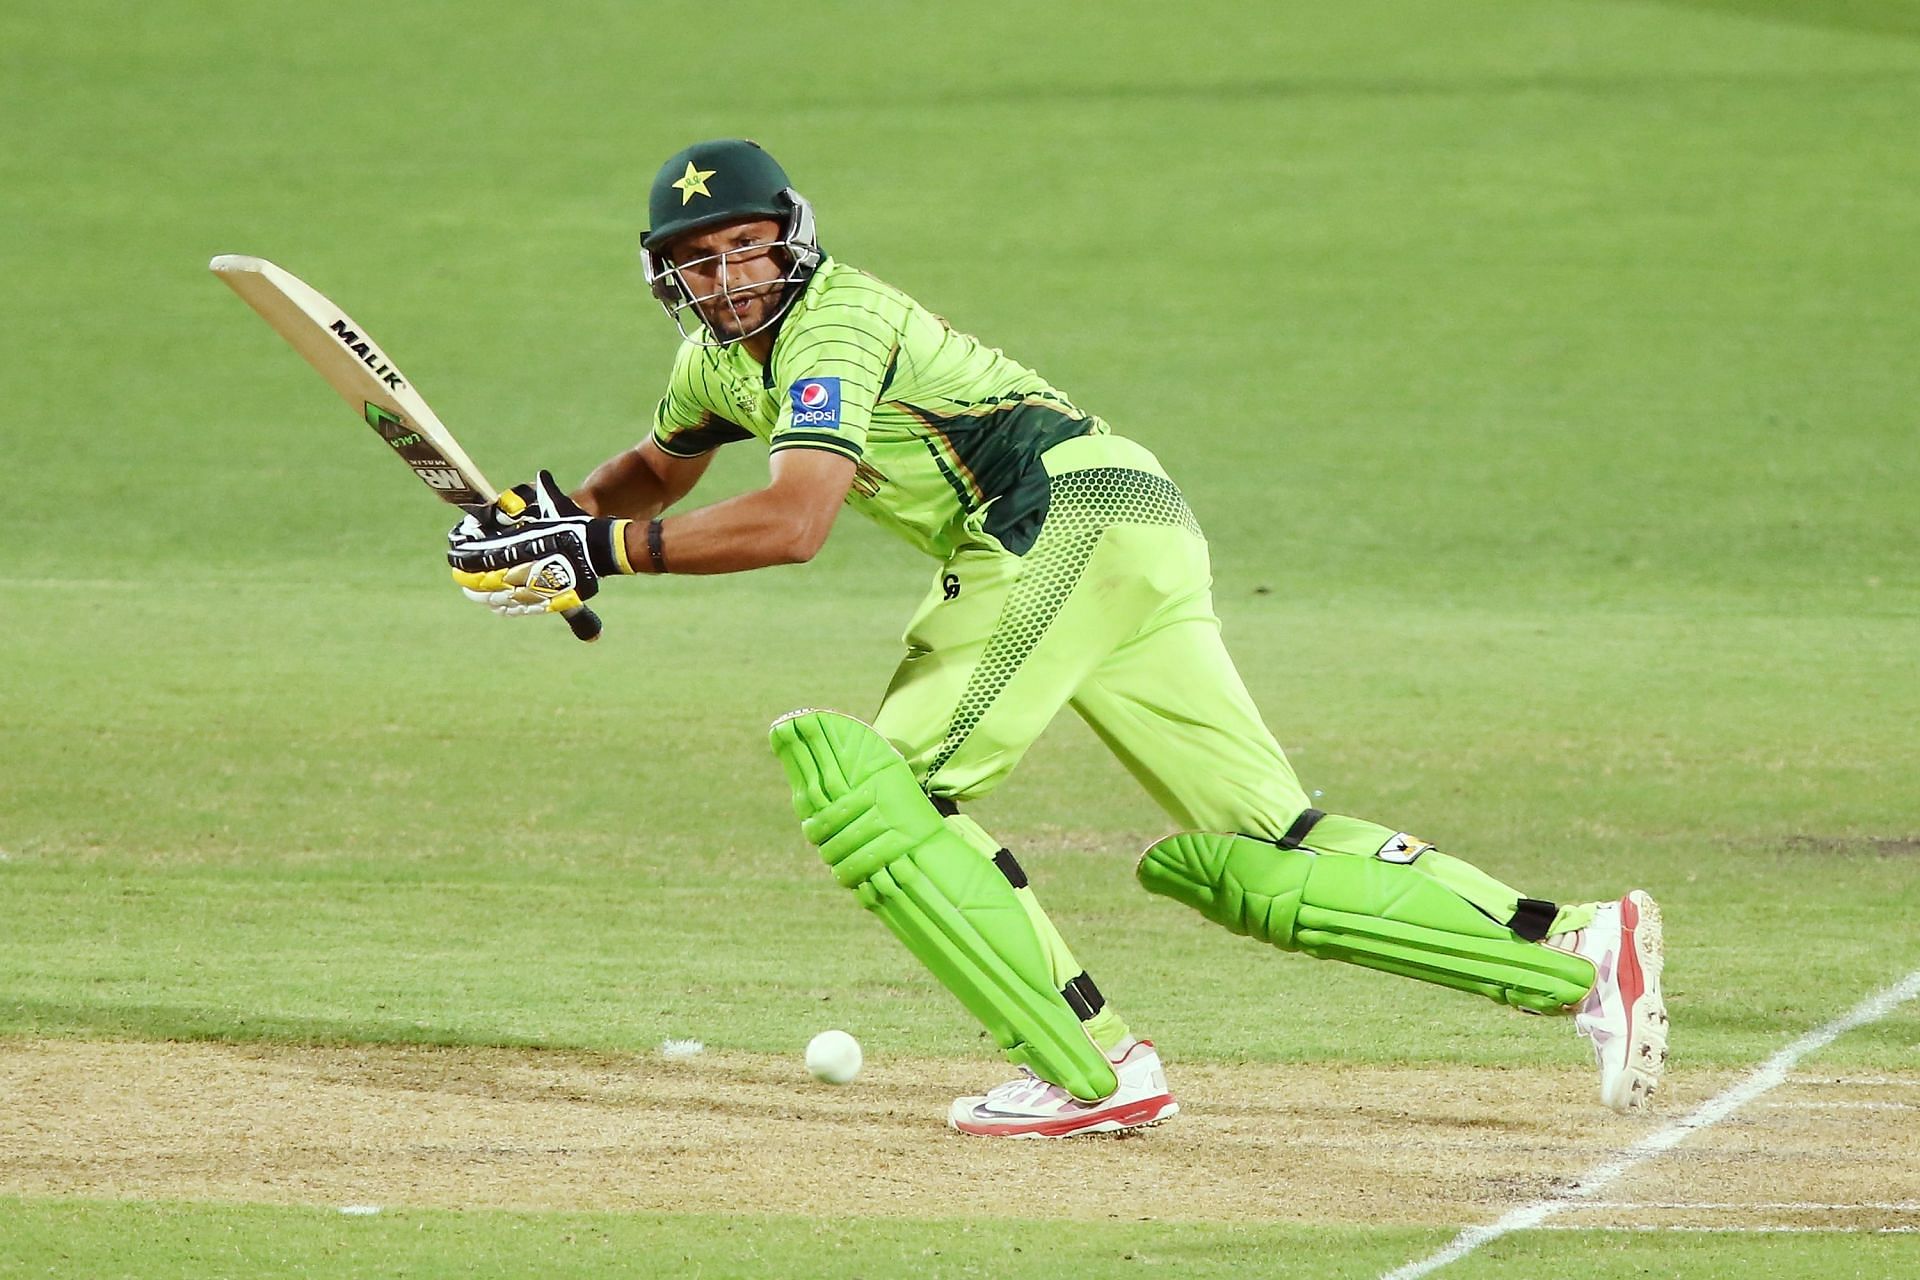 Shahid Afridi during India v Pakistan - 2015 ICC Cricket World Cup [Getty Images]